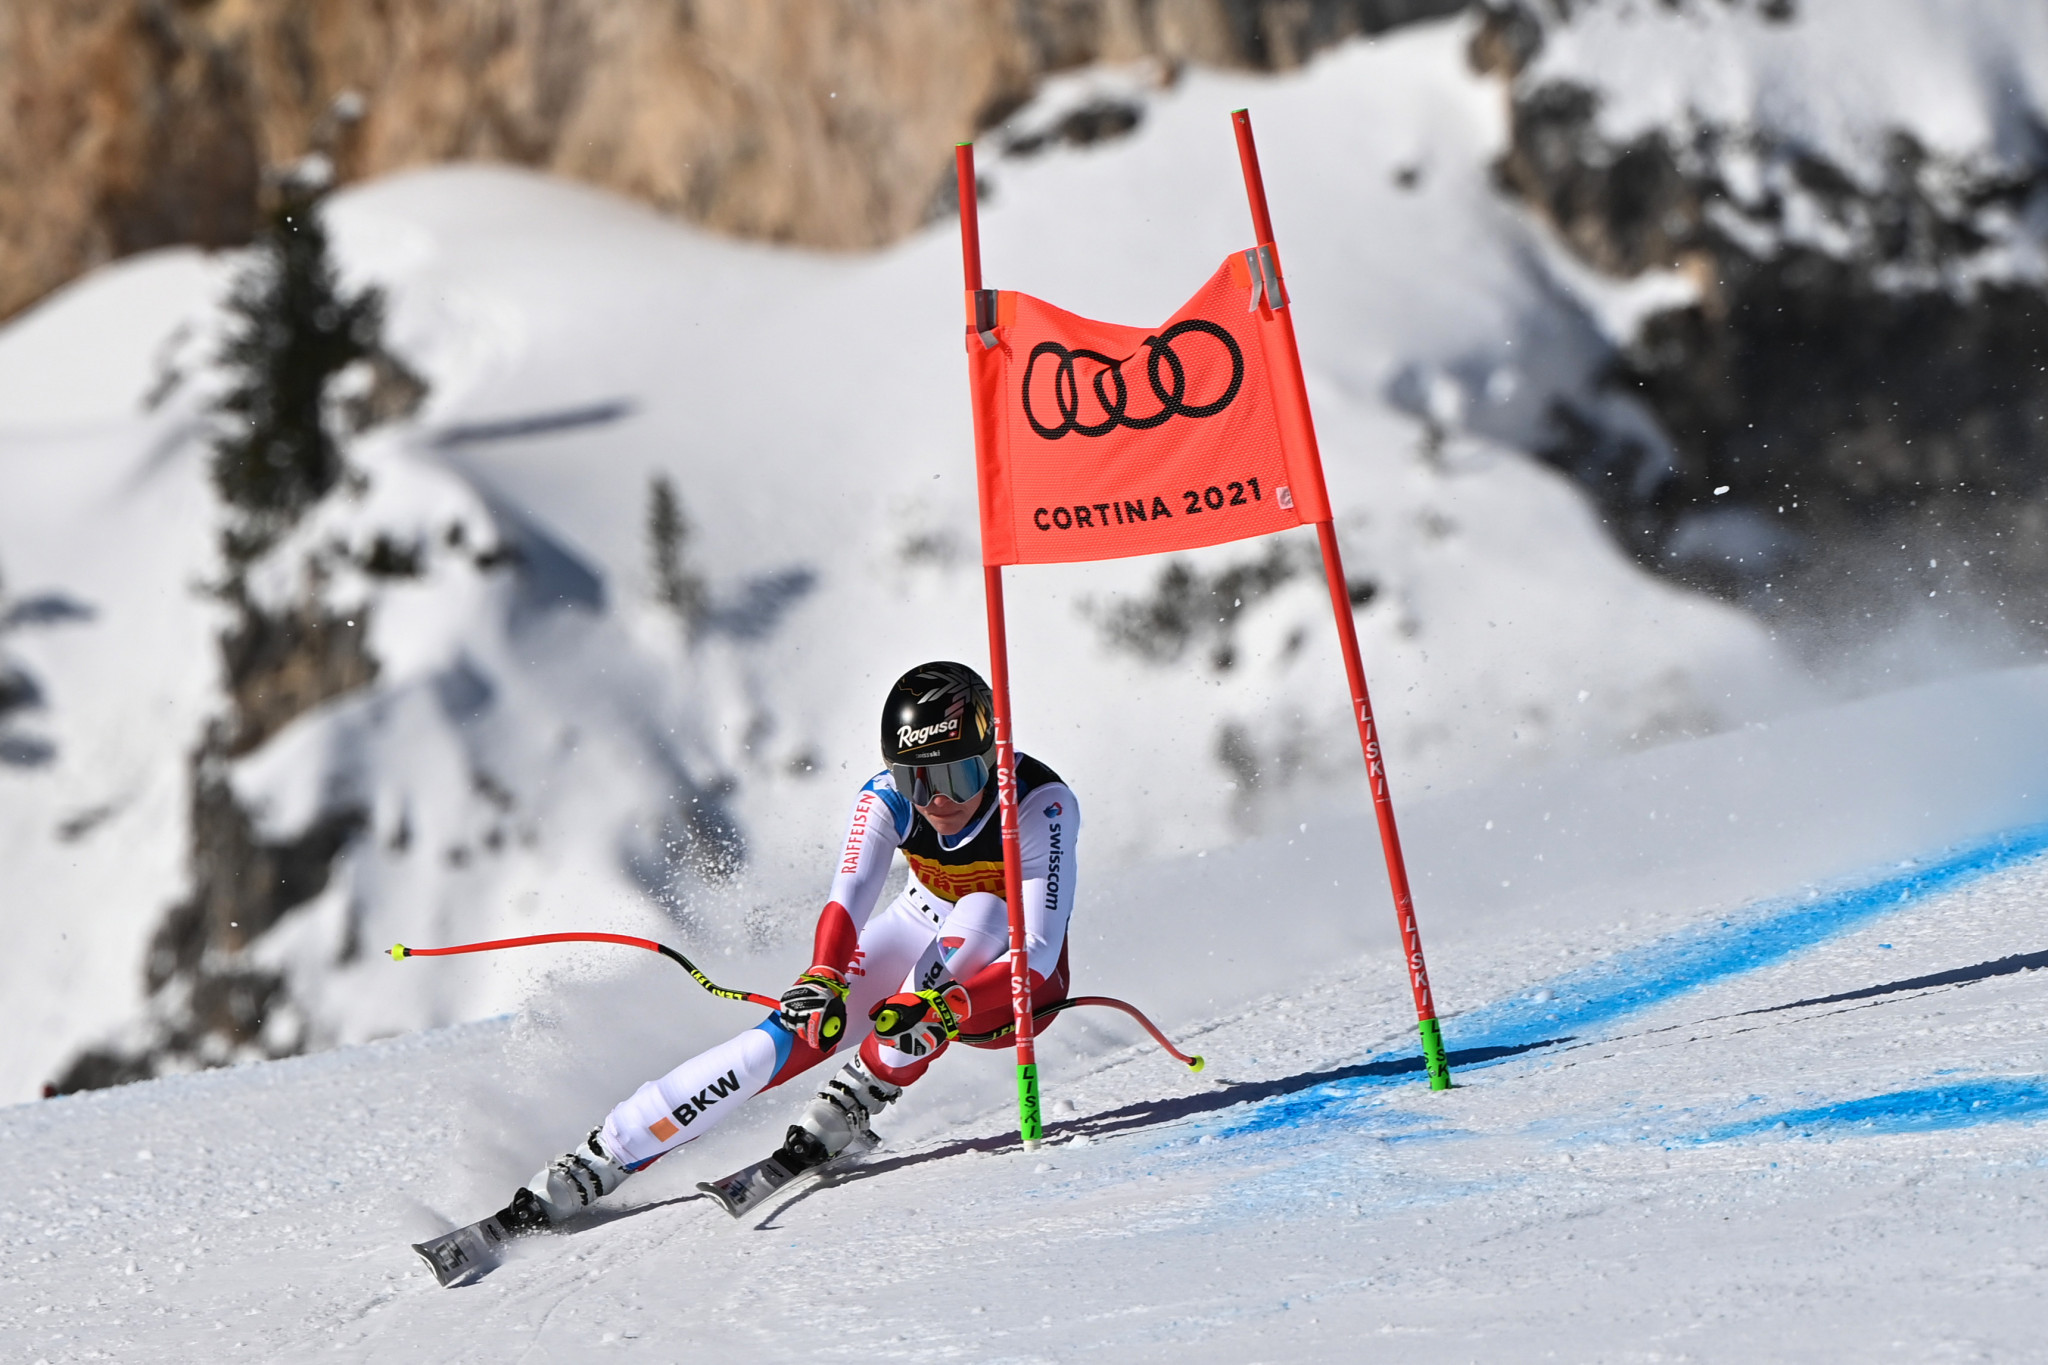 Lara Gut-Behrami is considered a favourite in the Super-G contest at the FIS Alpine Ski World Cup in Val di Fassa ©Getty Images